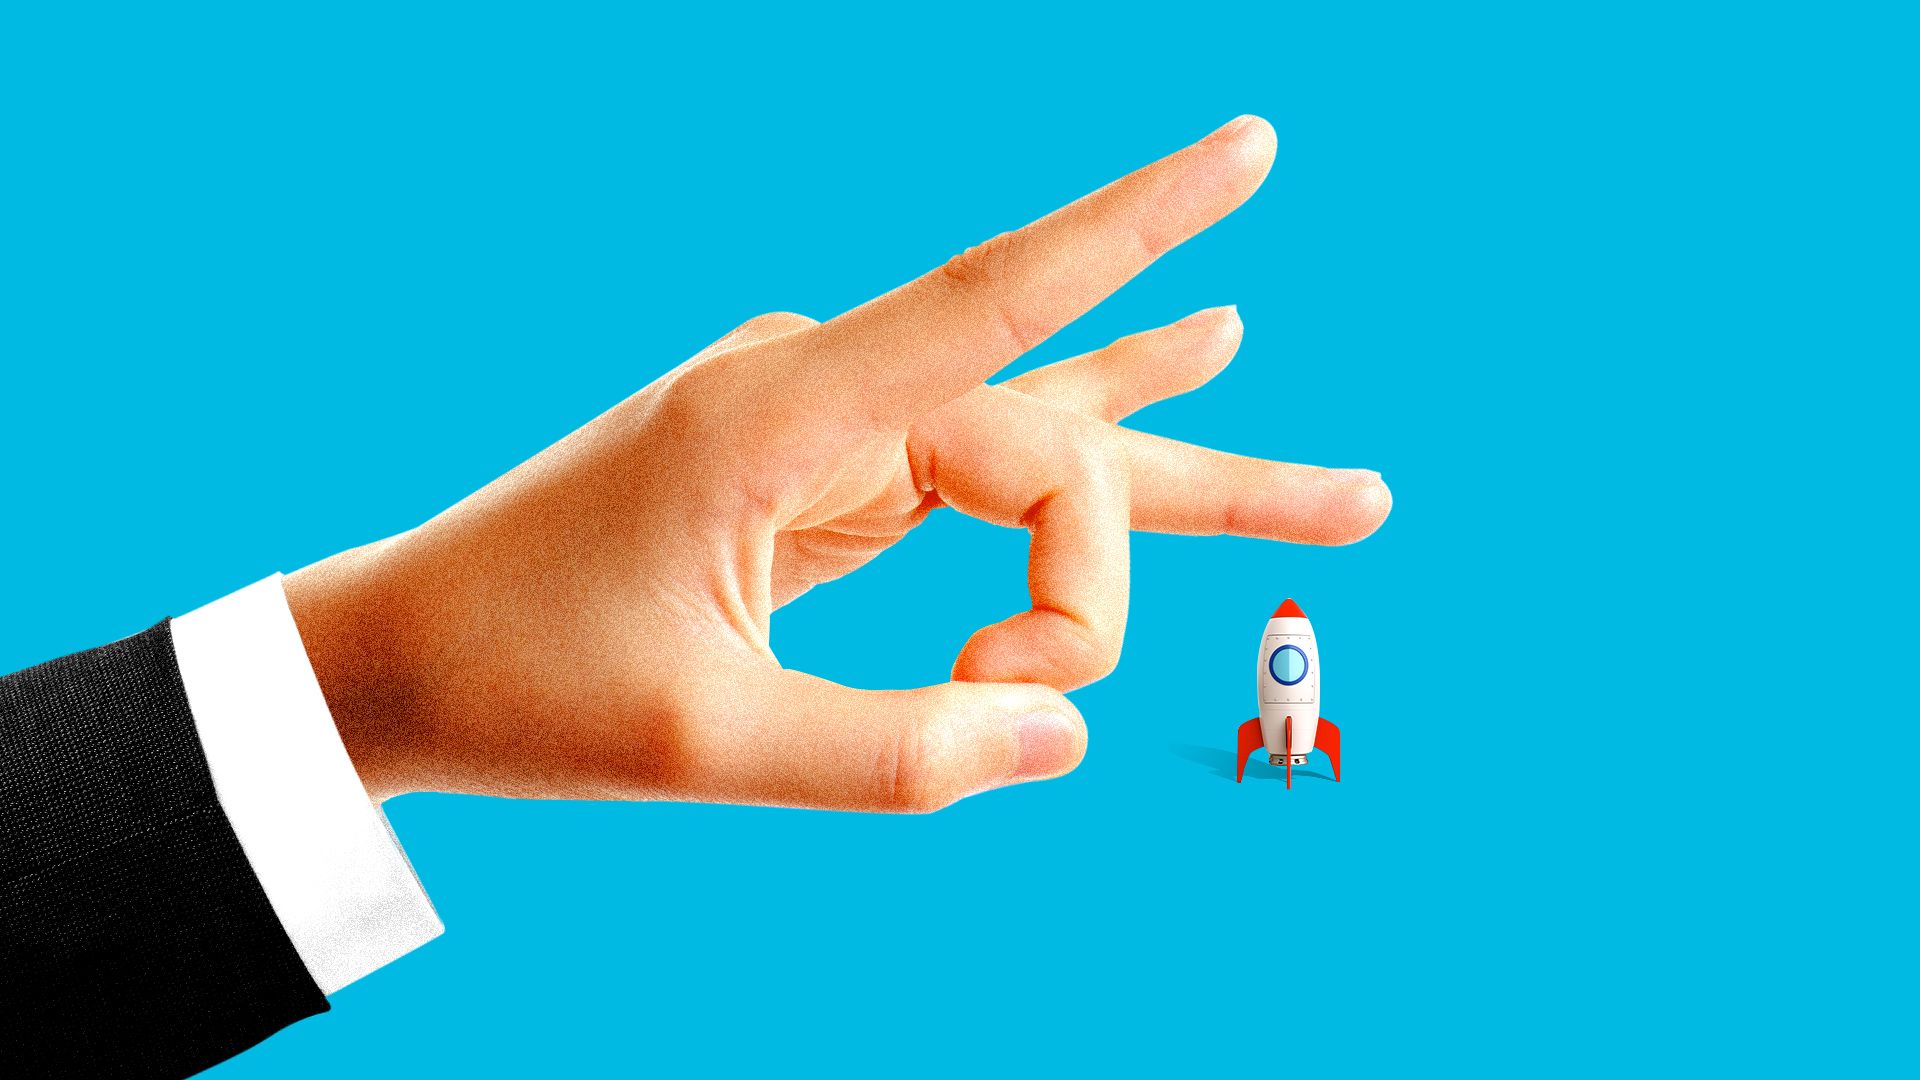 Illustration of a giant hand about to flick away a tiny rocket ship.